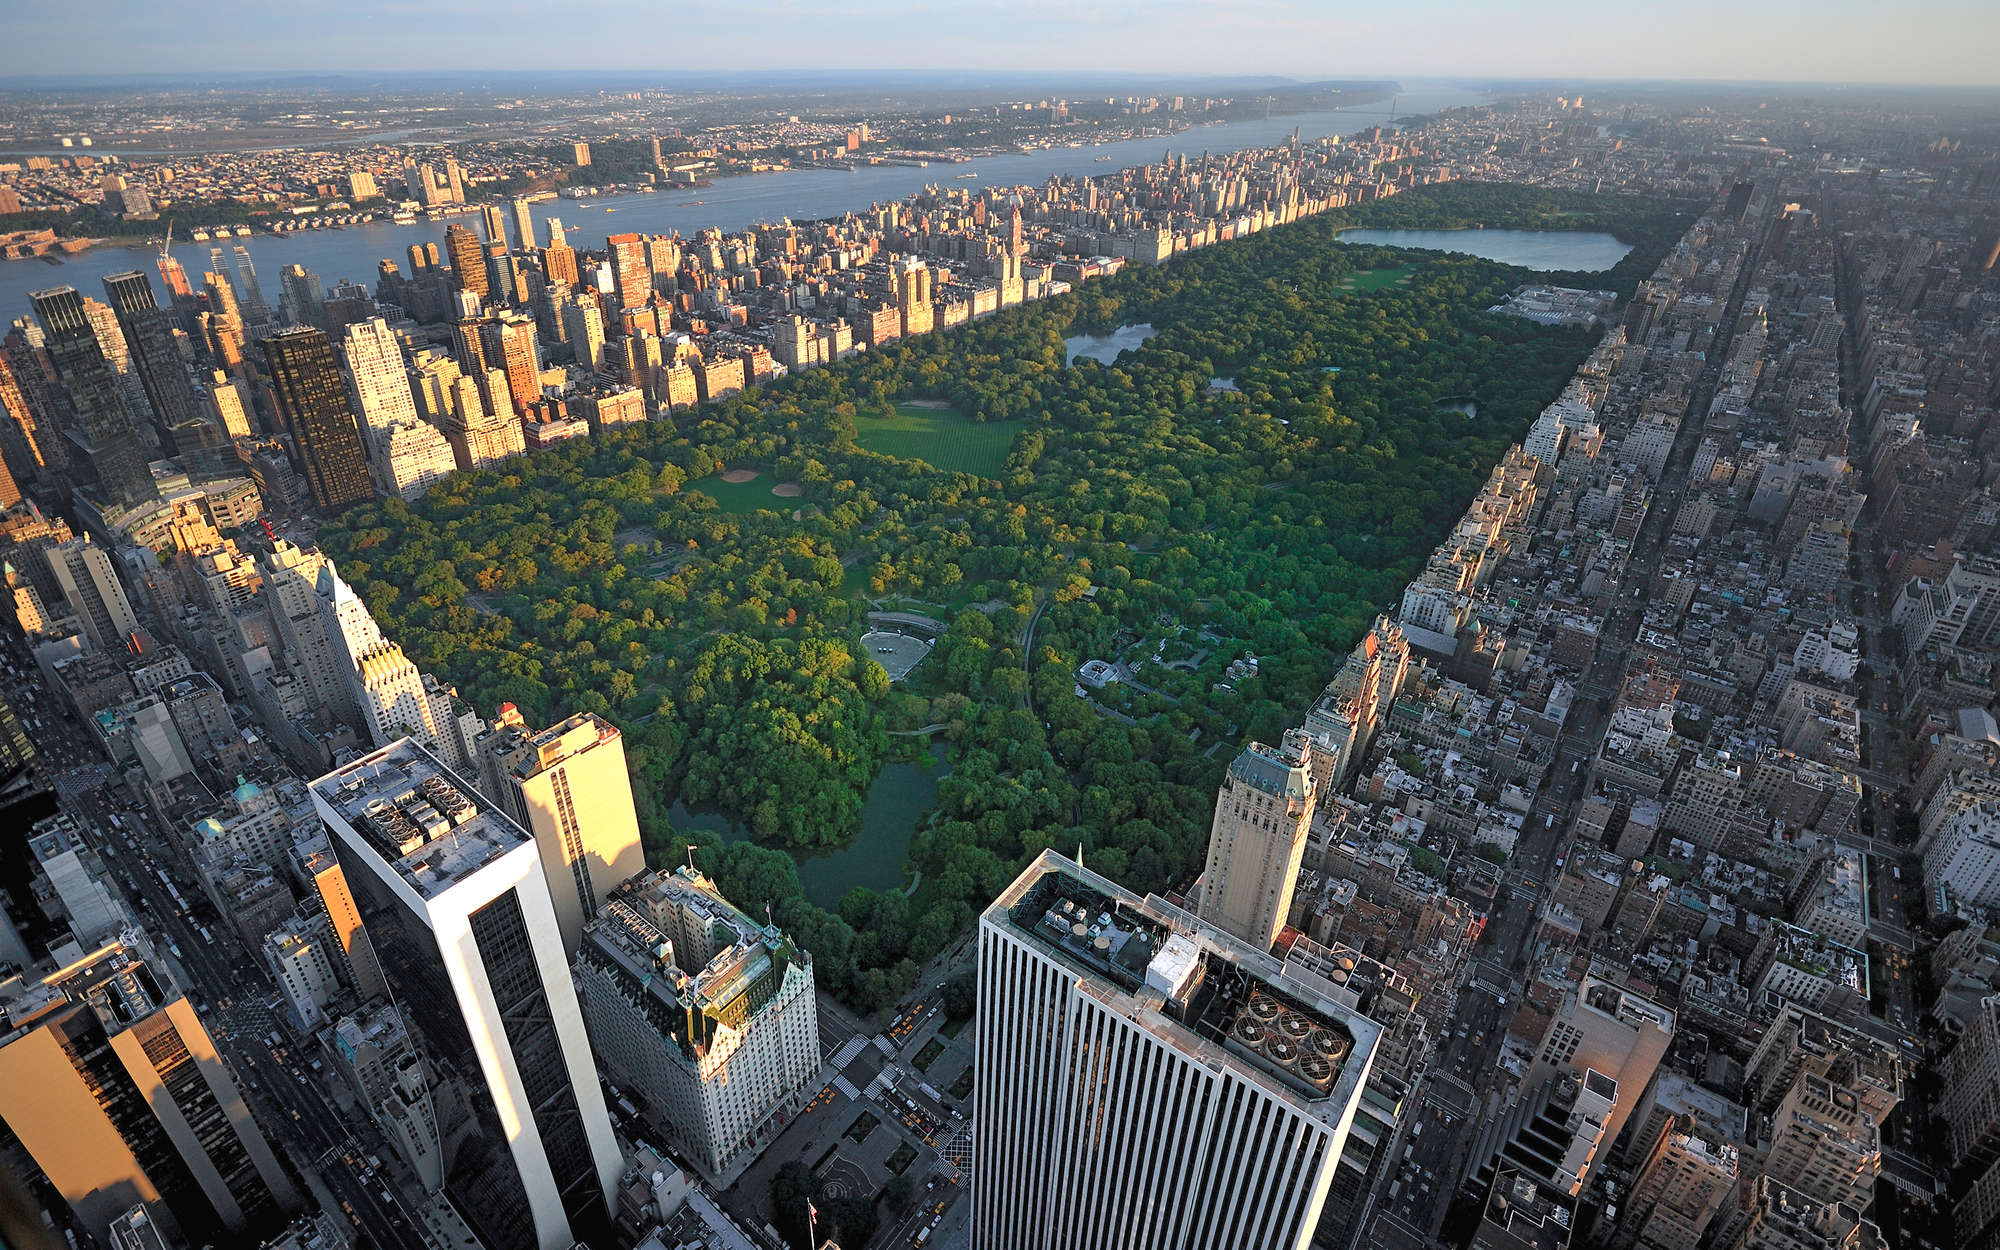             Photo wallpaper New York Central Park from above - Premium smooth fleece
        